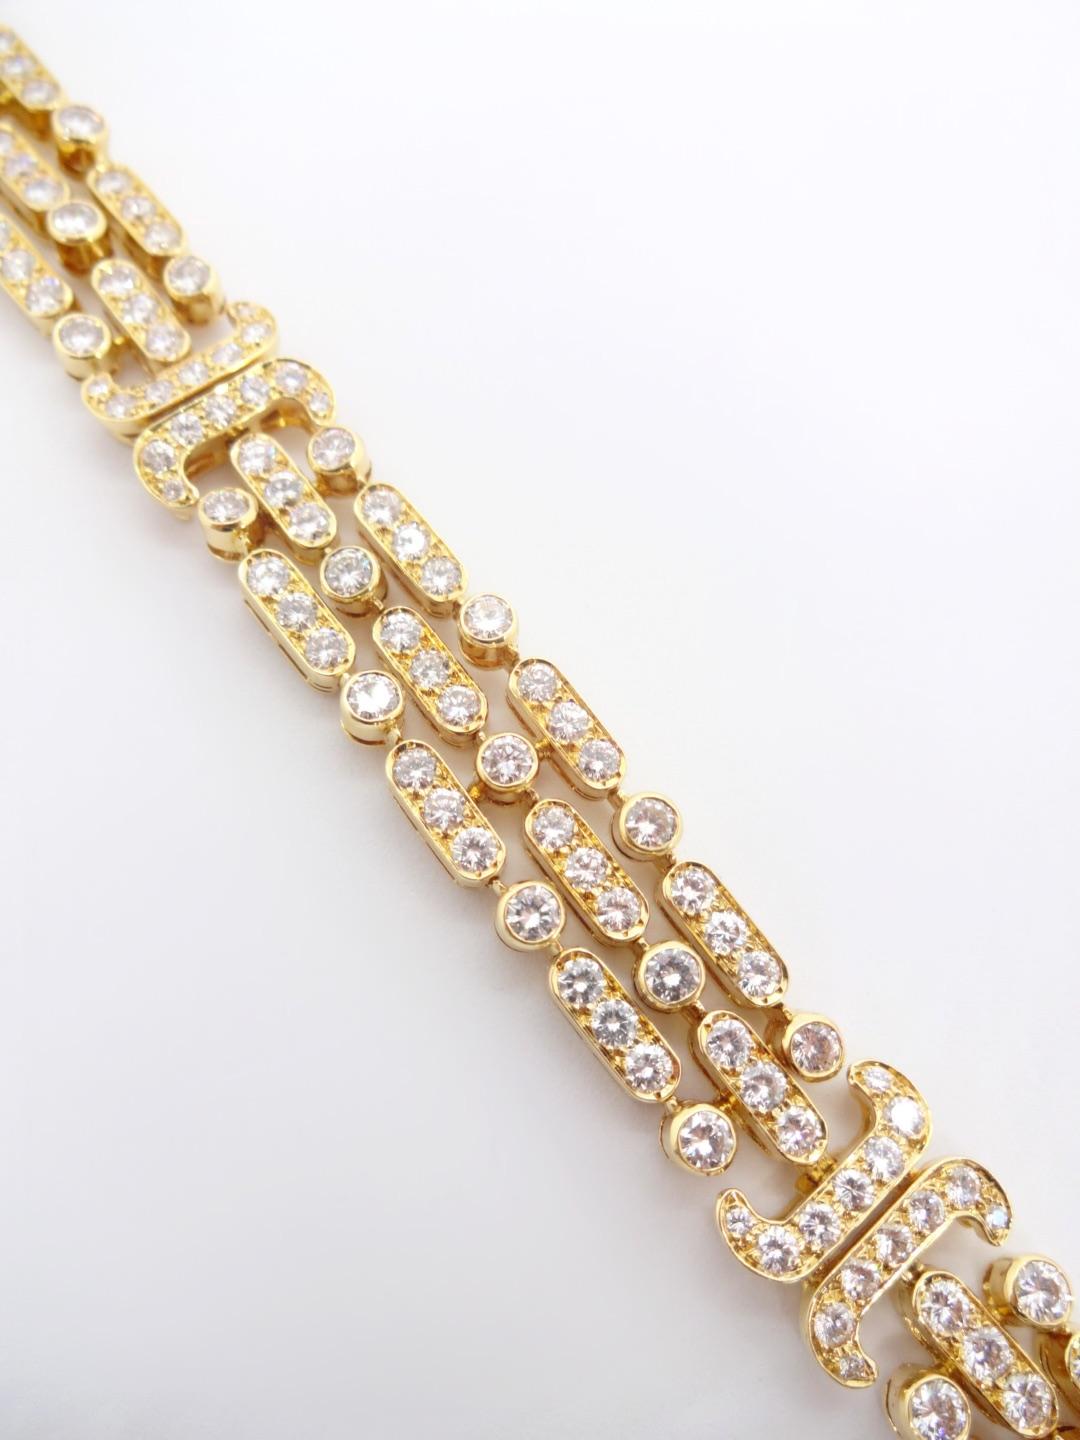 Contemporary Van Cleef & Arpels 18 Karat Gold and Diamond Bracelet, Signed and Numbered For Sale